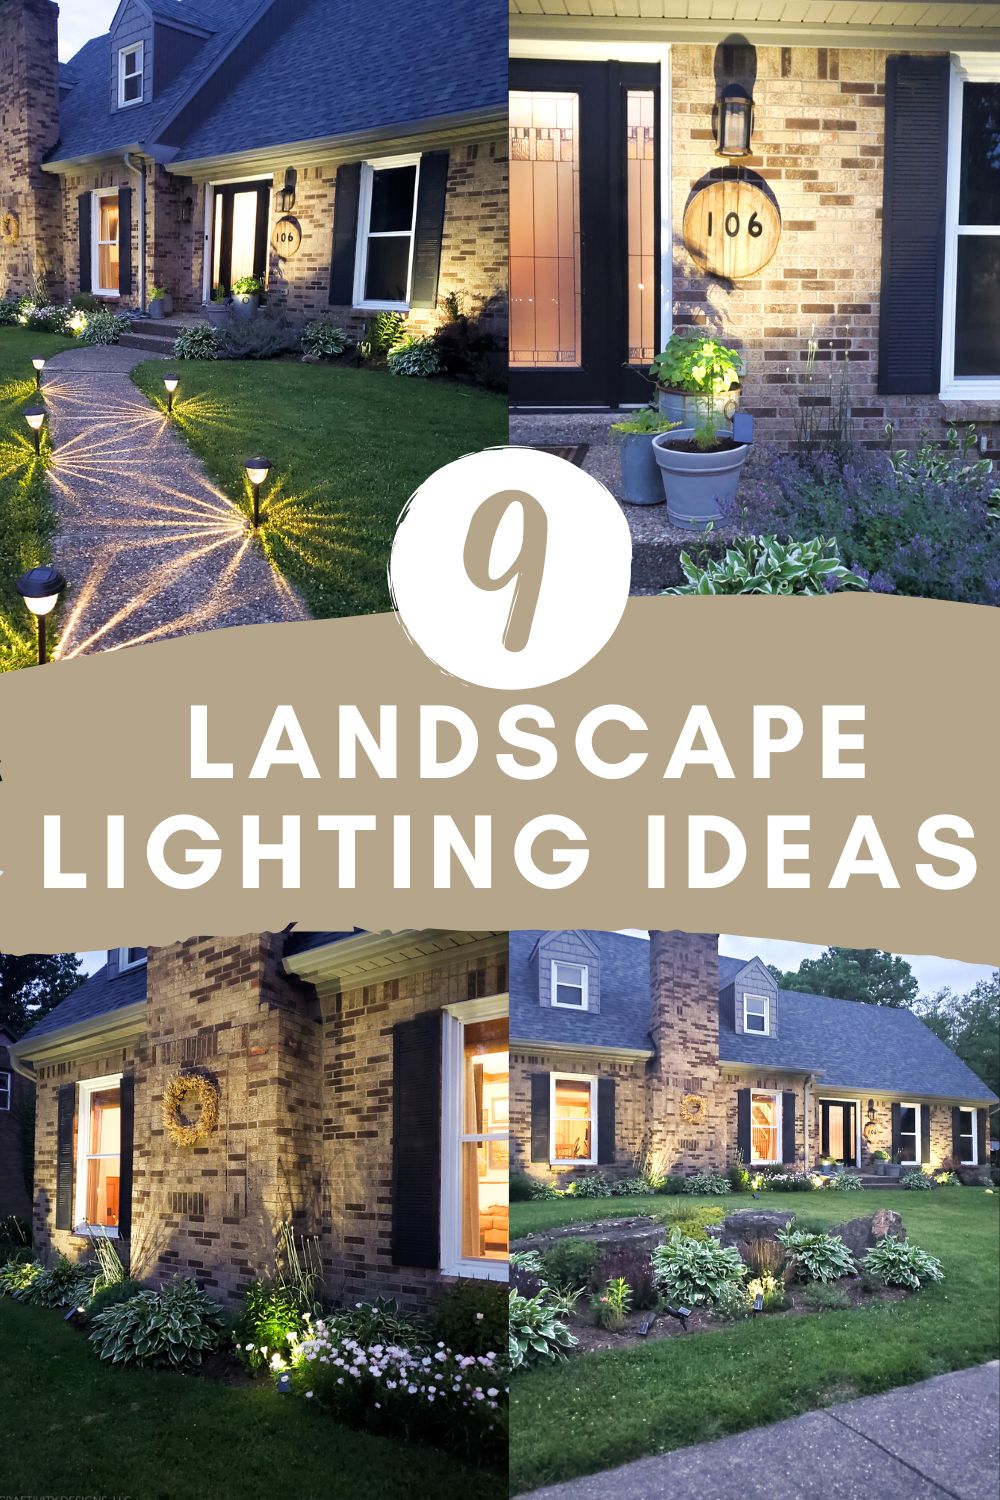 Landscaping Direct - Outdoor Garden Lighting - Landscaping Products